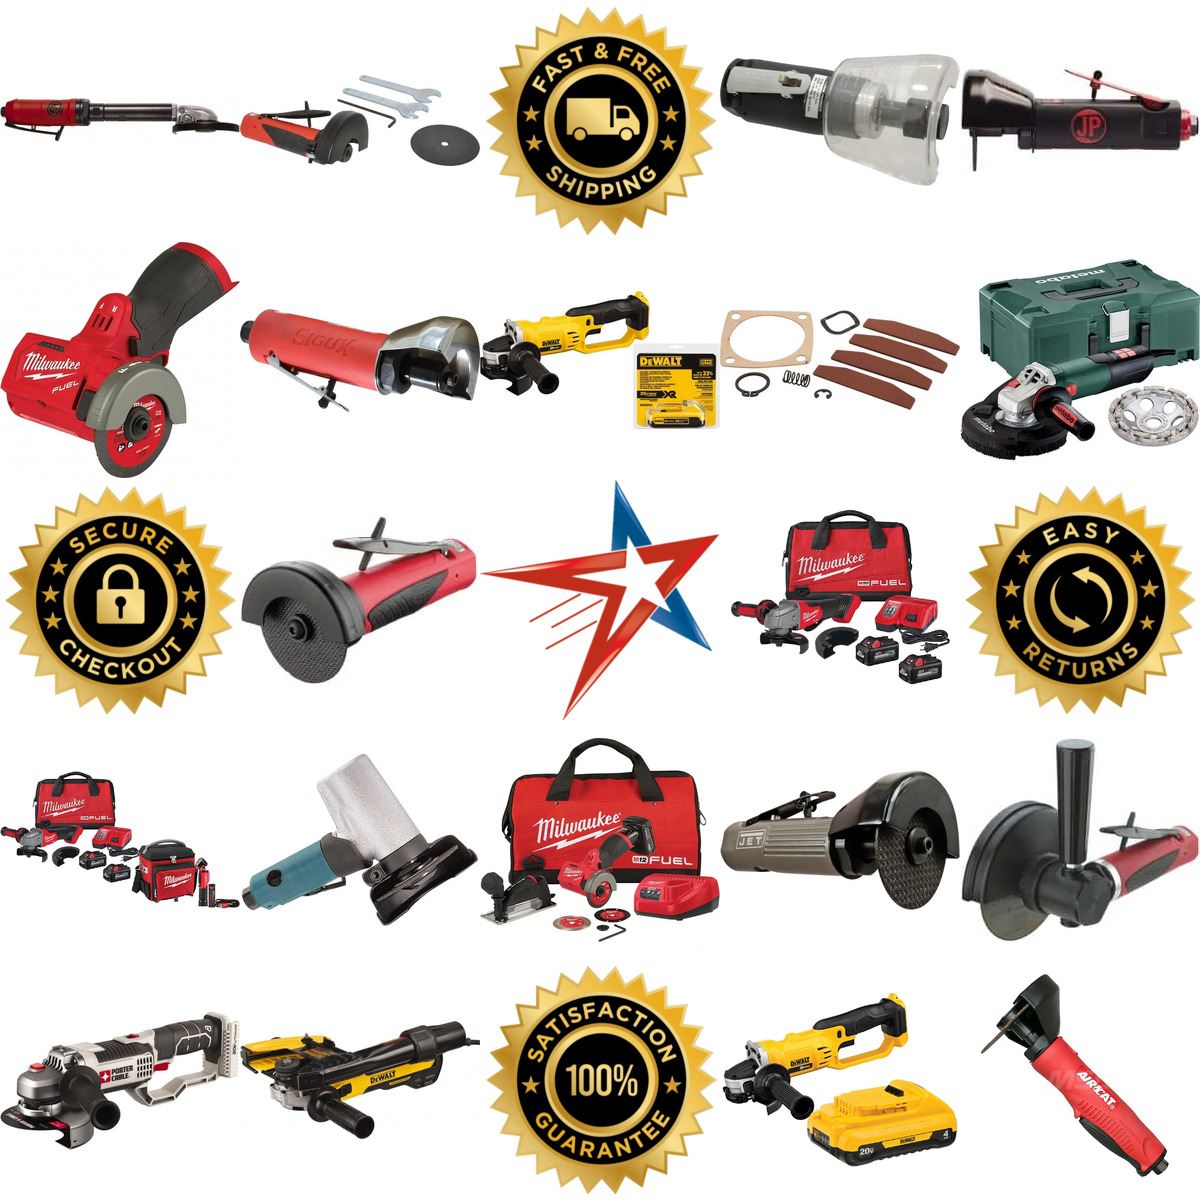 A selection of Cut Off Tools and Cut Off Grinder Tools products on GoVets